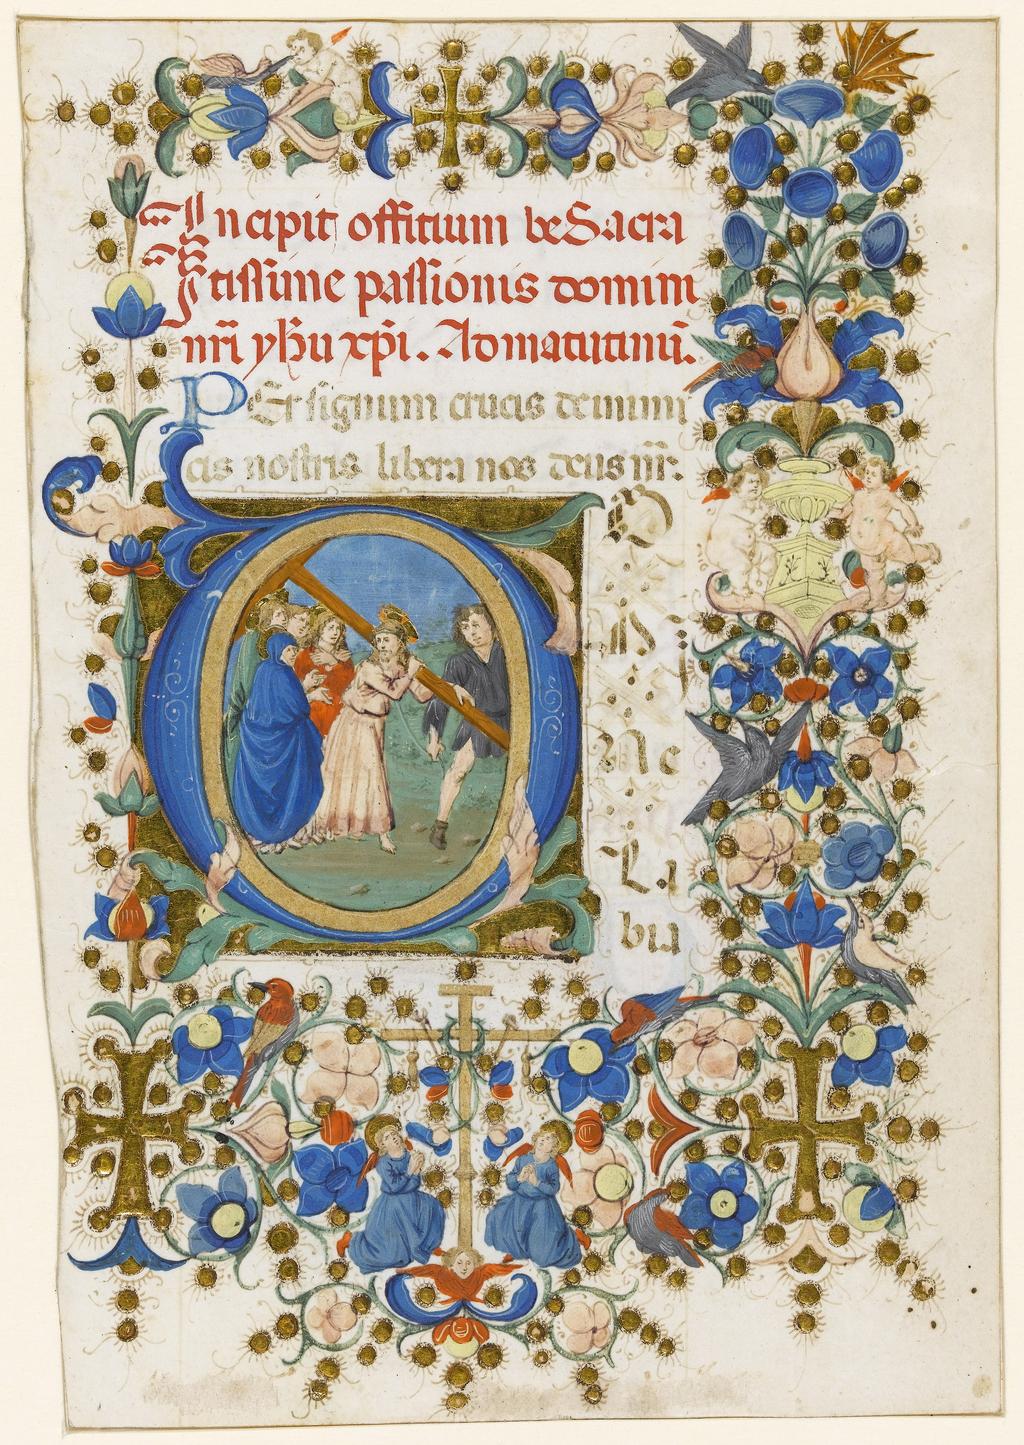 An image of Illuminated Manuscript. Cutting. Leaf from a Book of Hours. Chierico. Francesco di Antonio del (Italian). Production Place: Italy, Florence. Parchment, gold, 130 x 90 mm (70 x 47 mm), 13 long lines ruled in ink, circa 1470 to circa 1484.CONTENTS: Beginning of the Hours of the Passion, continuing on reverse, expl. Venite exultemus. DECORATION: Historiated initial in pink or blue on gold ground, with acanthus extensions and full floral borders containing putti, birds, vases, gold crosses and scenes: Hours of the Passion, [D, 8 ll.], Carrying of the Cross, with two angels adoring the Cross, Crown of Thorns and Instruments of the passion in lower border. ORNAMENTATION: Blue penwork initial [V, 2 ll.] with red pen-flourished infill and extension for Psalm 94 (MS 257d verso); red or blue one-line penwork initials.